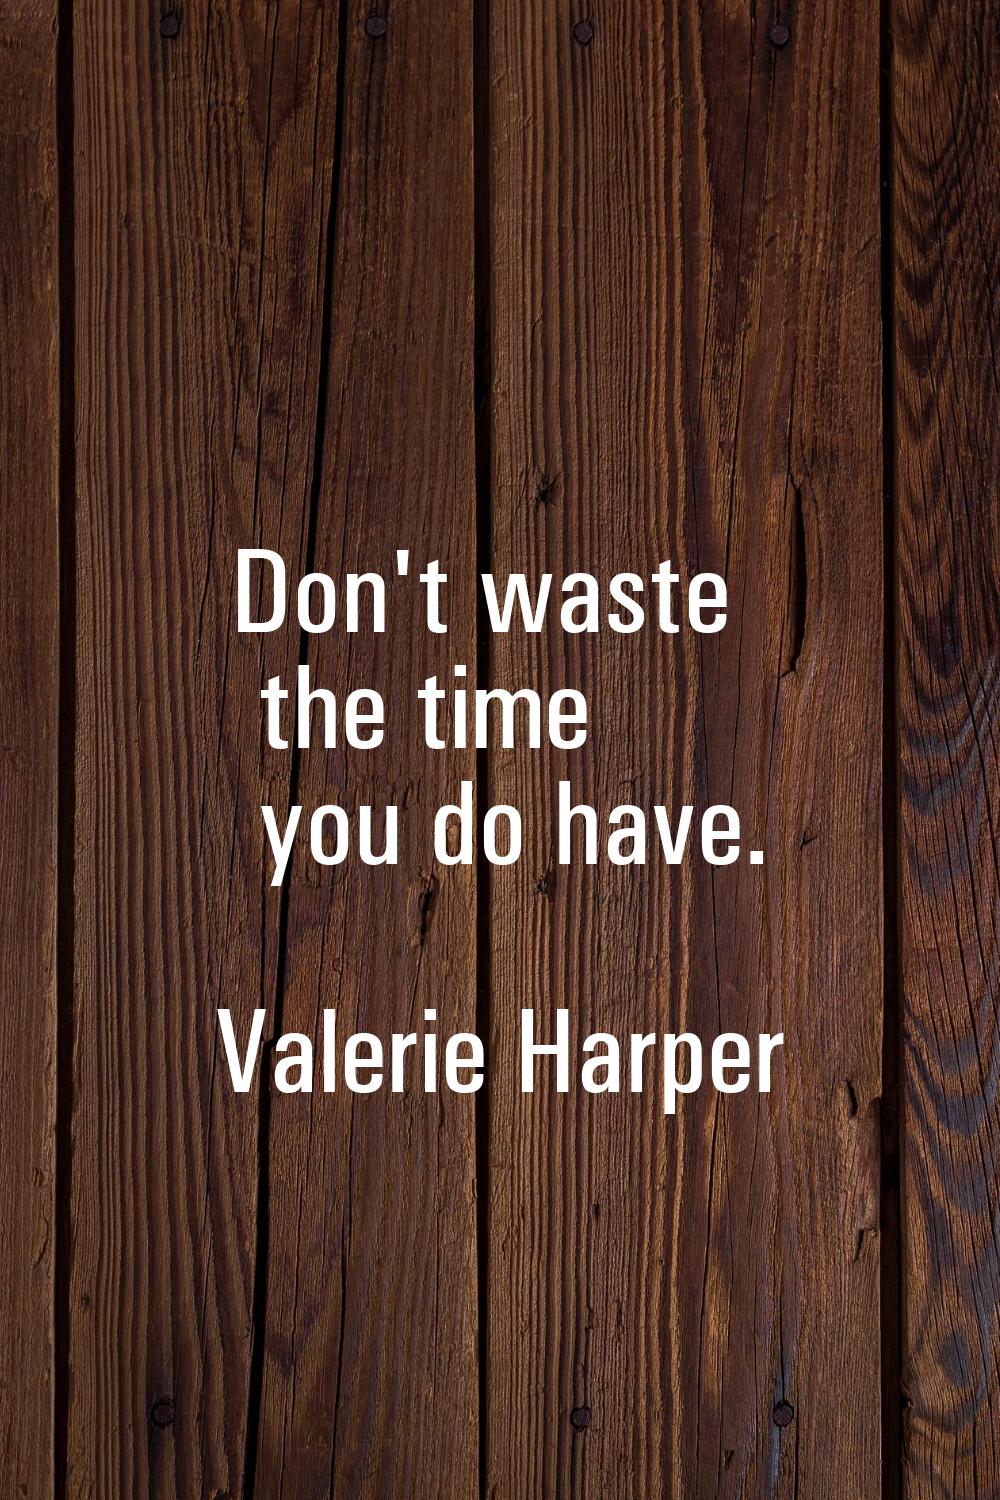 Don't waste the time you do have.